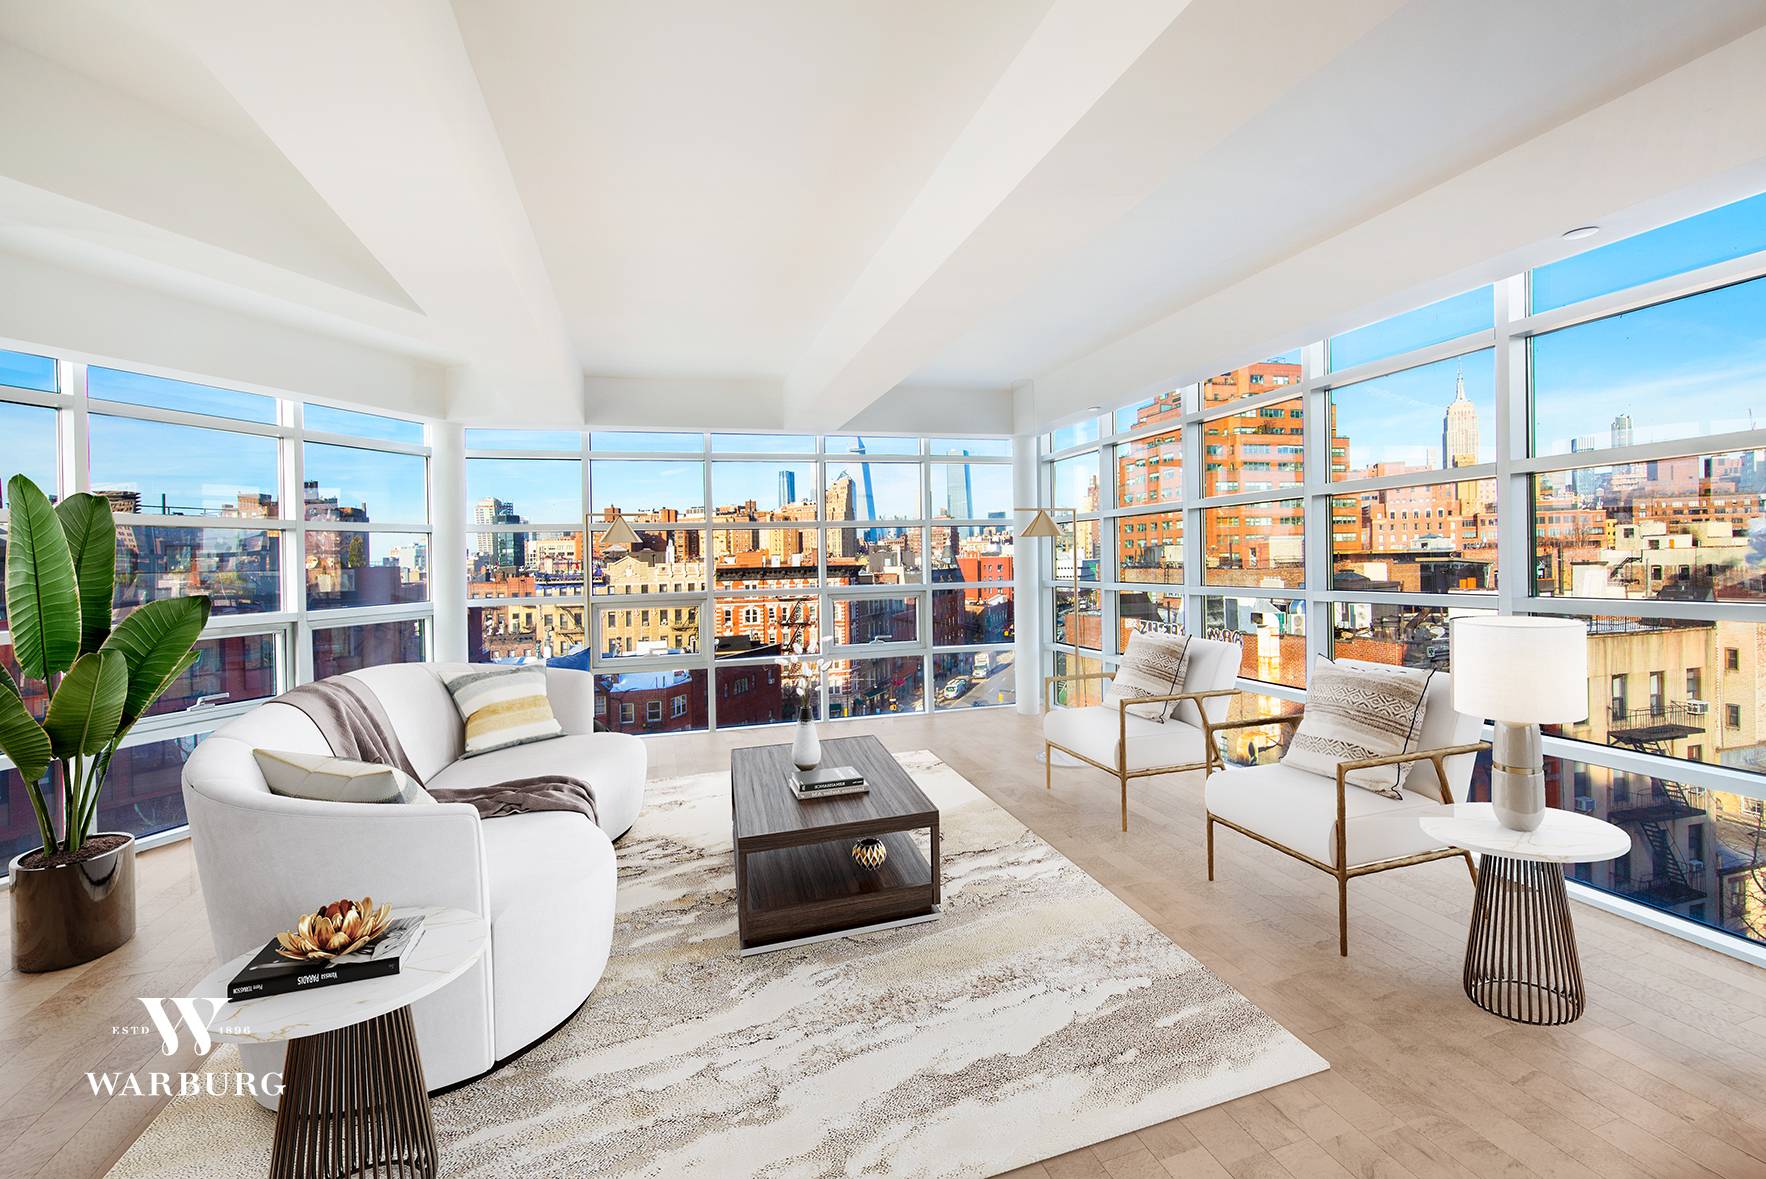 In the heart of Greenwich Village sits a new luxury rental building.